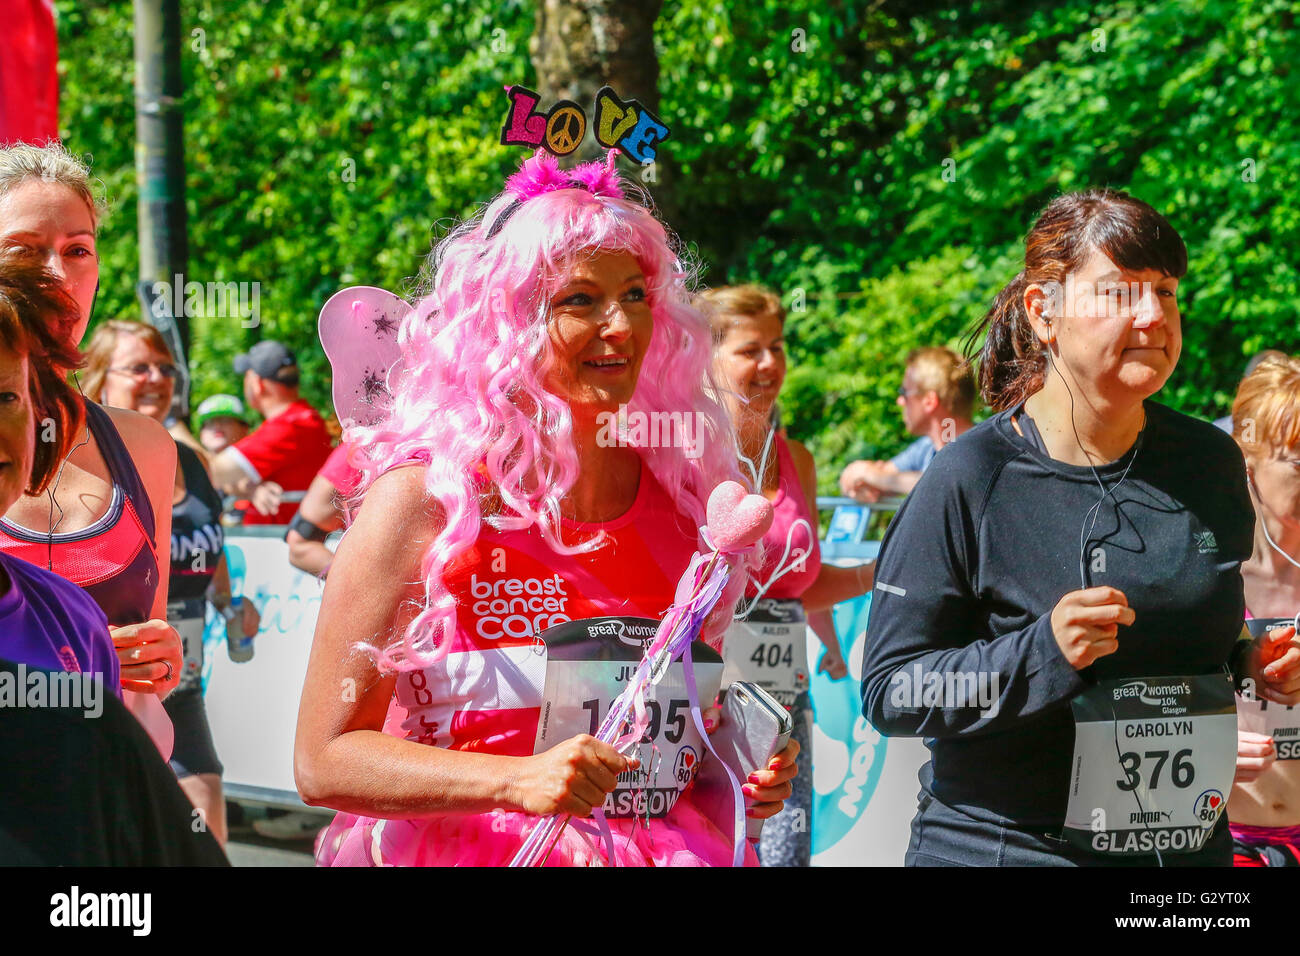 On a hot sunny June Sunday, with temperatures into the mid 20's, over 6000 women took part in the Glasgow "Great Run" starting in Kelvingrove Park and running through the city and along the River Clyde, encouraged along the way by musicians and cheerleaders. Because of the hot weather, a cold shower station was set up for the participants to run through and cool down. Stock Photo